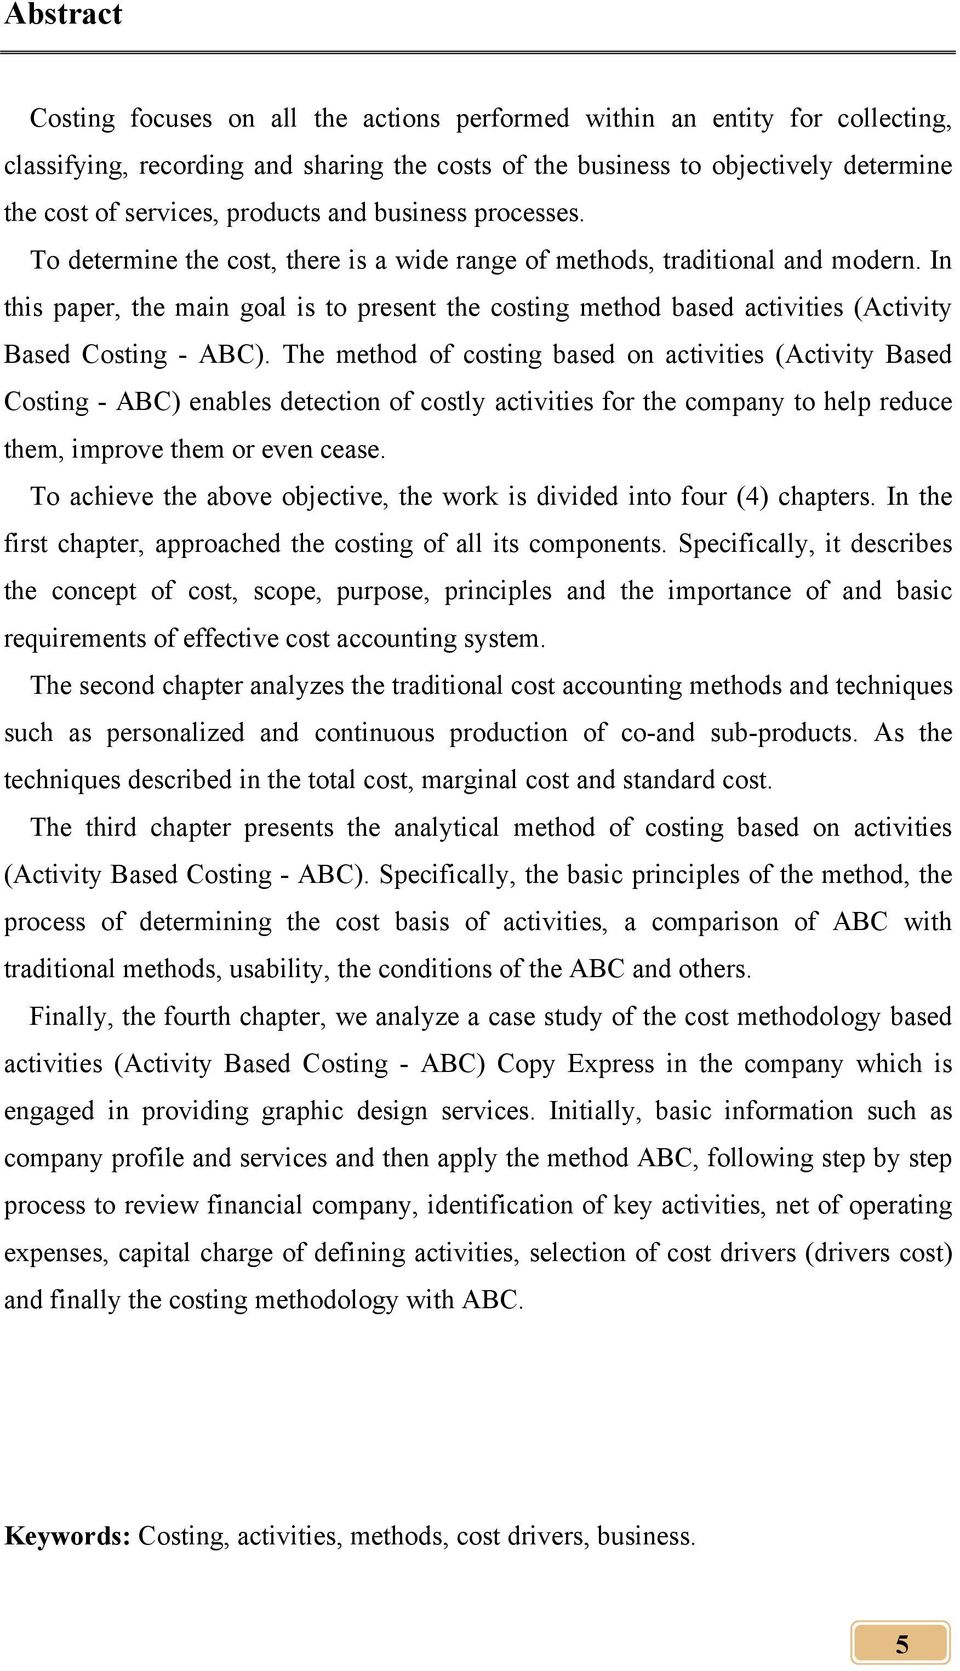 In this paper, the main goal is to present the costing method based activities (Activity Based Costing - ABC).